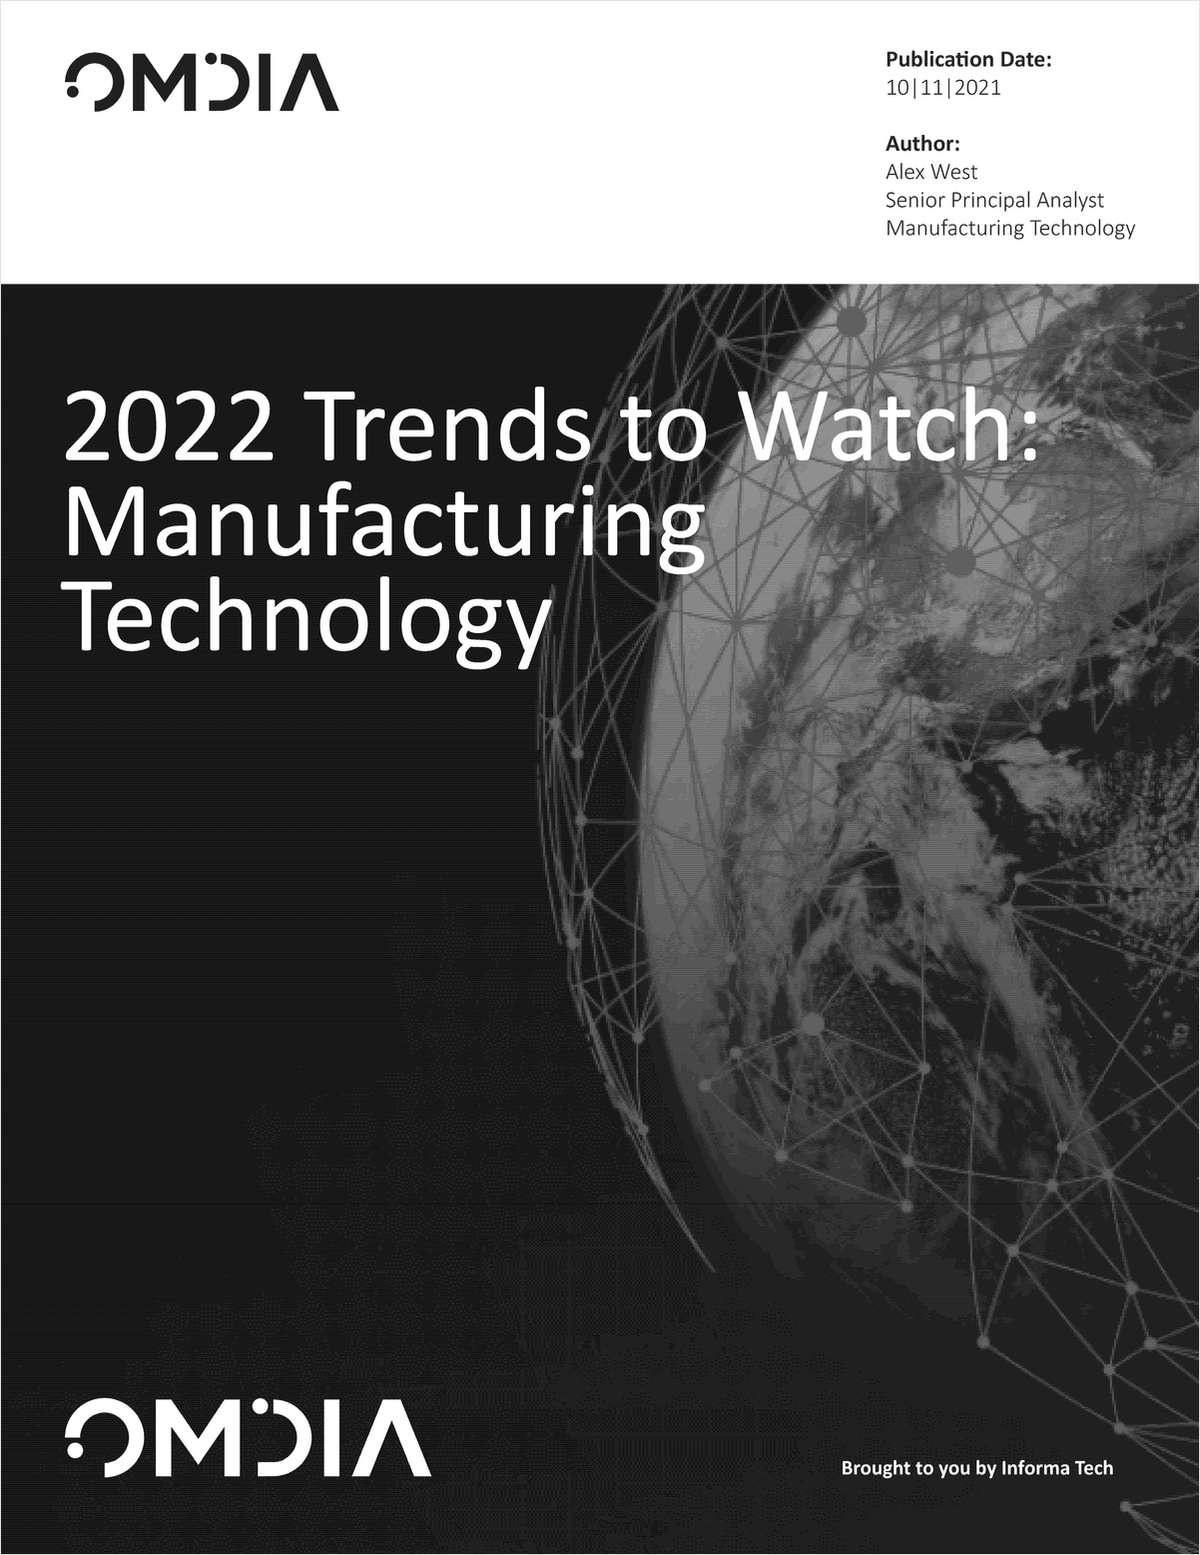 Manufacturing Technology -- Trends to Watch 2022